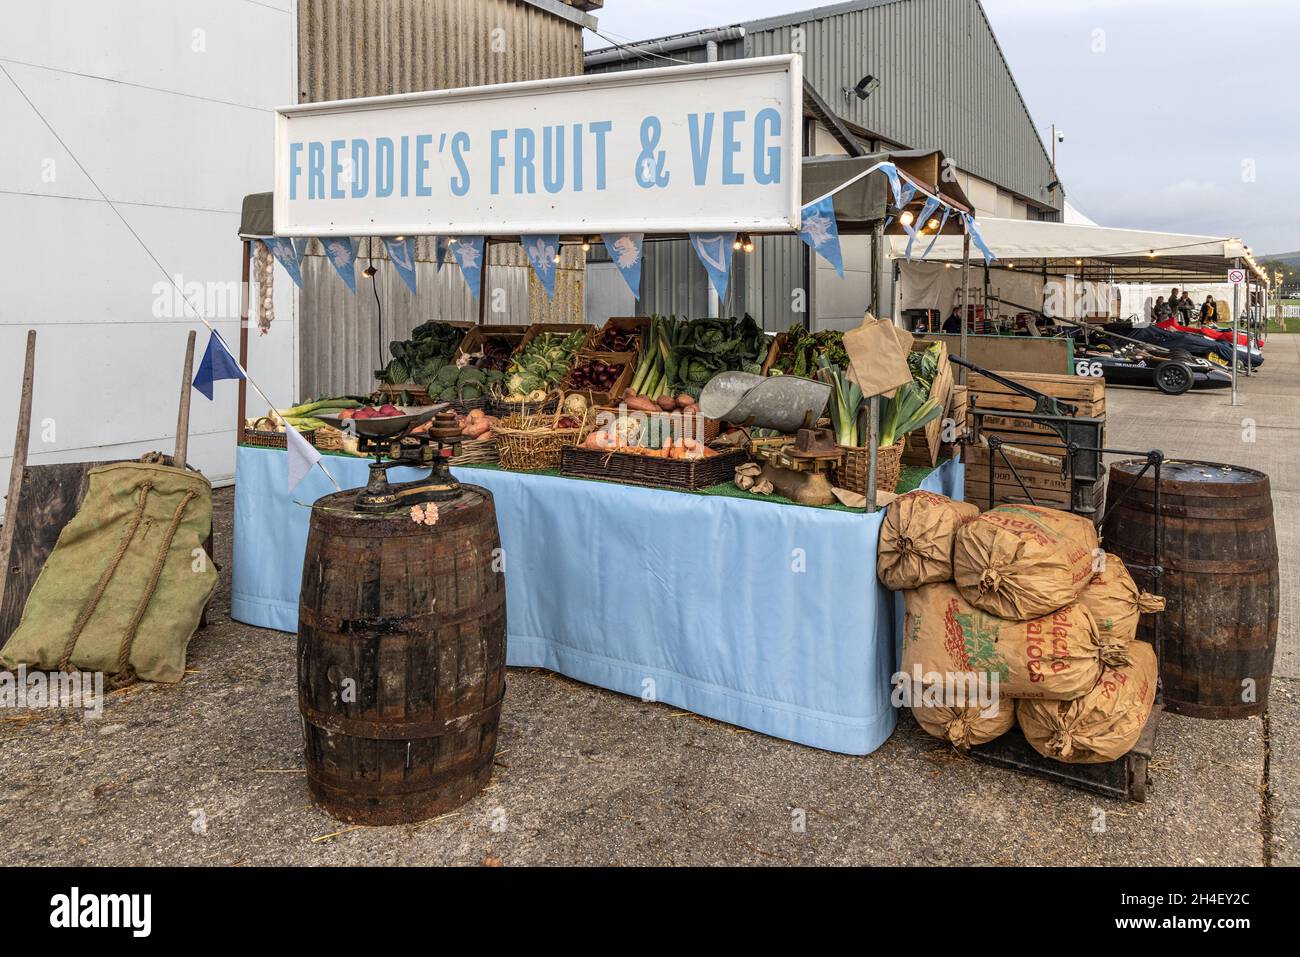 Freddie's Fruit & Drink stall. A mock-up market stand with real fruit and veg' at the 78th Goodwood Members Meeting, Sussex, UK. Stock Photo